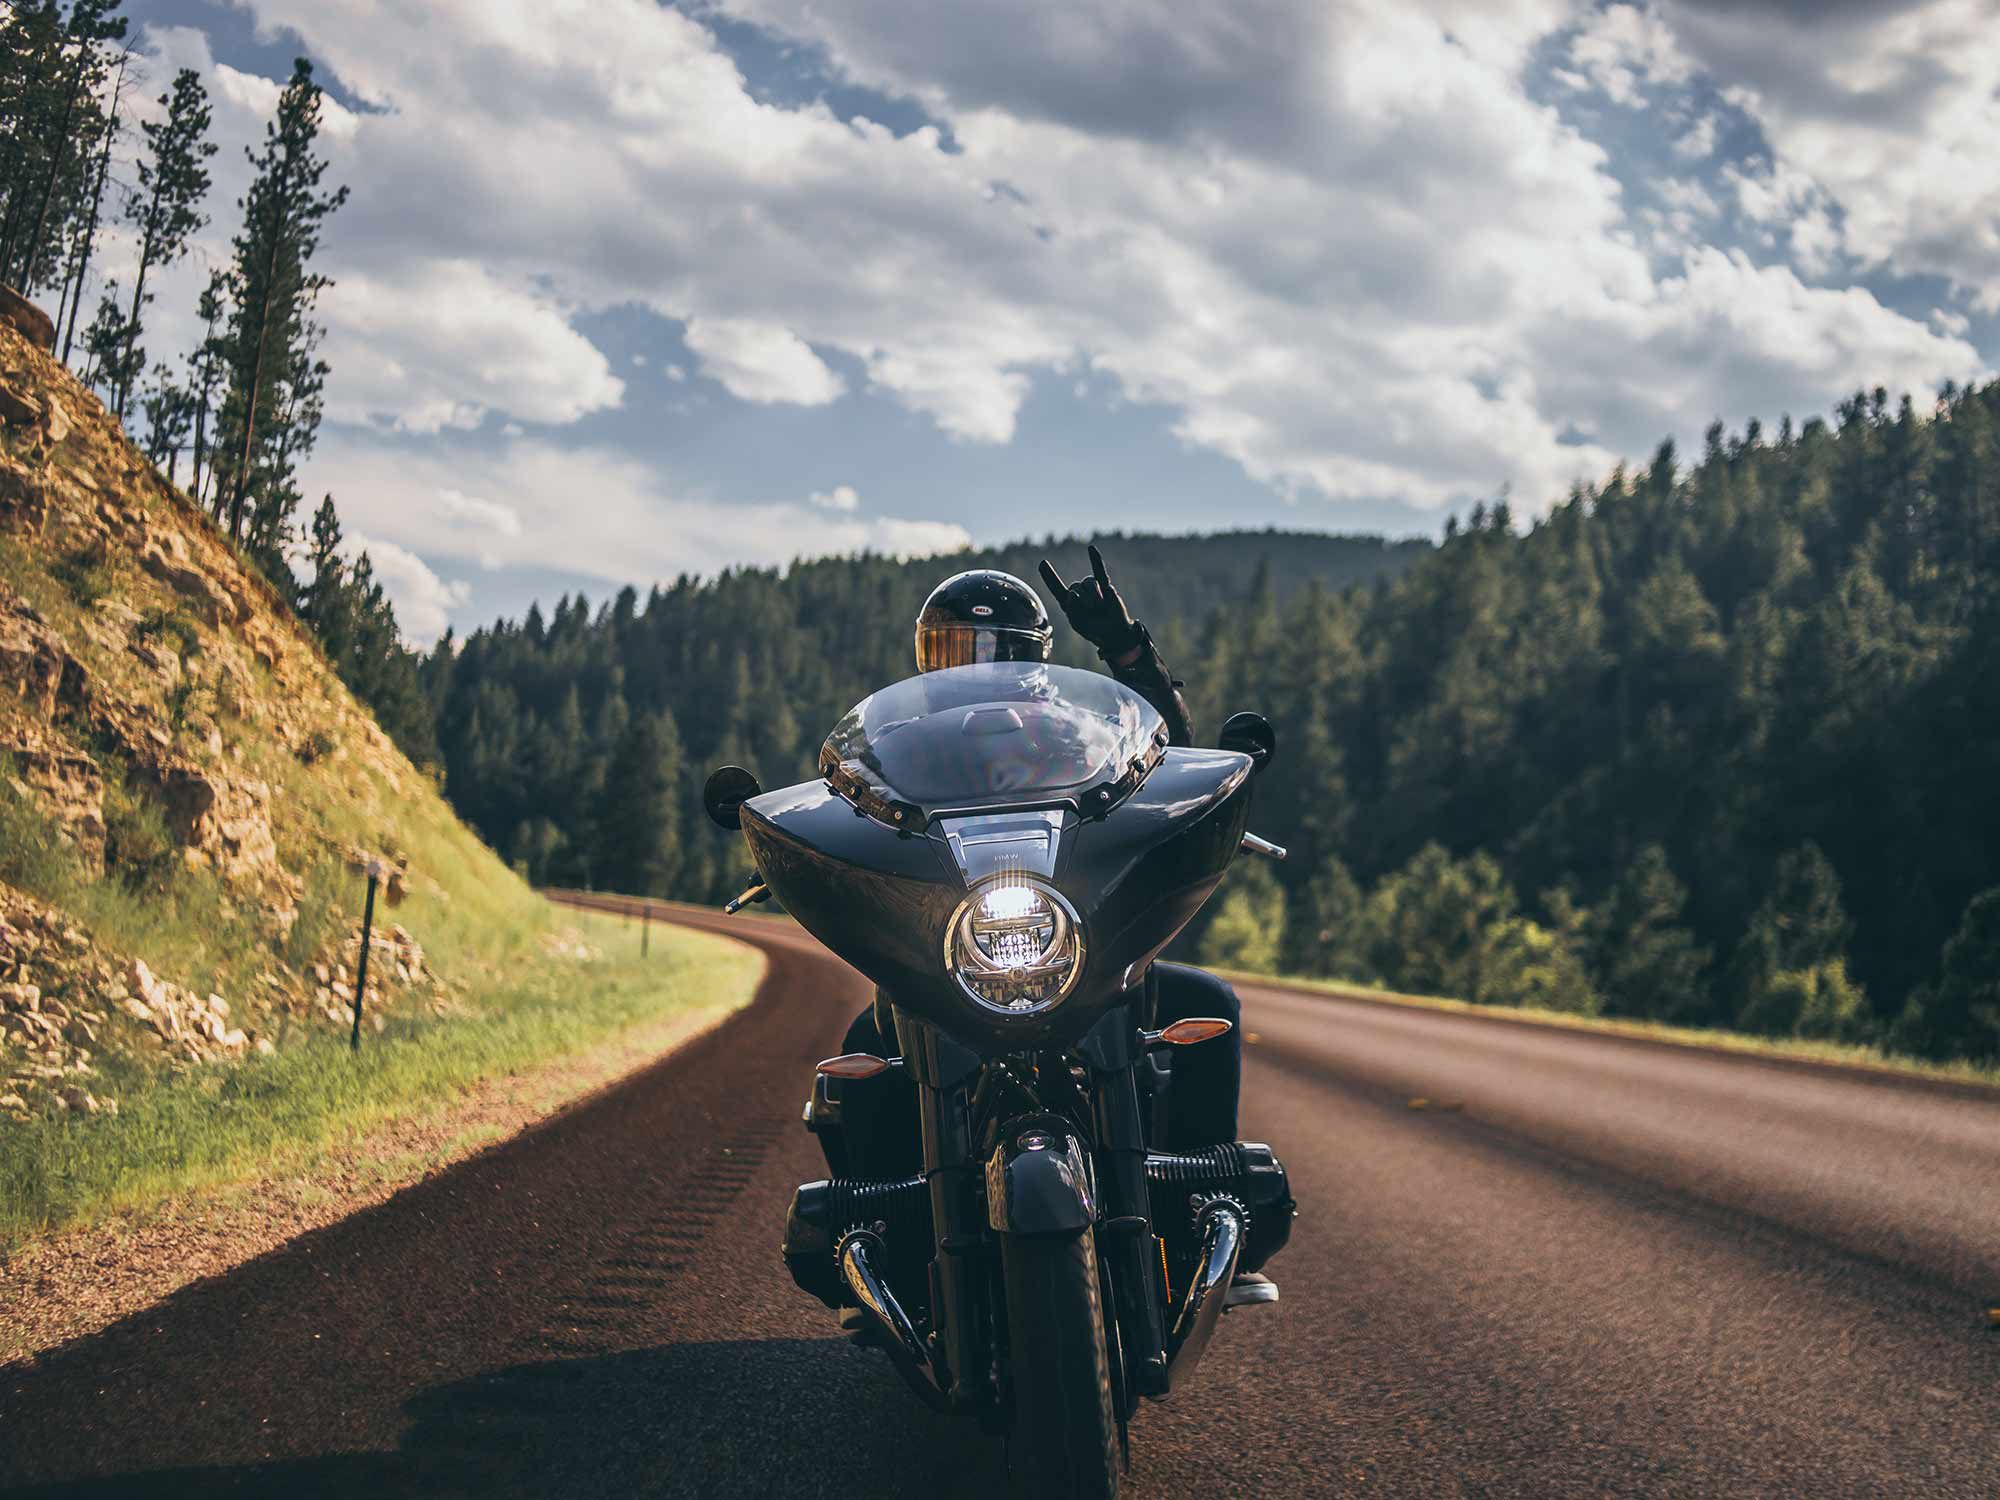 It can’t be all Harleys: A BMW R 18 B invades the Black Hills.